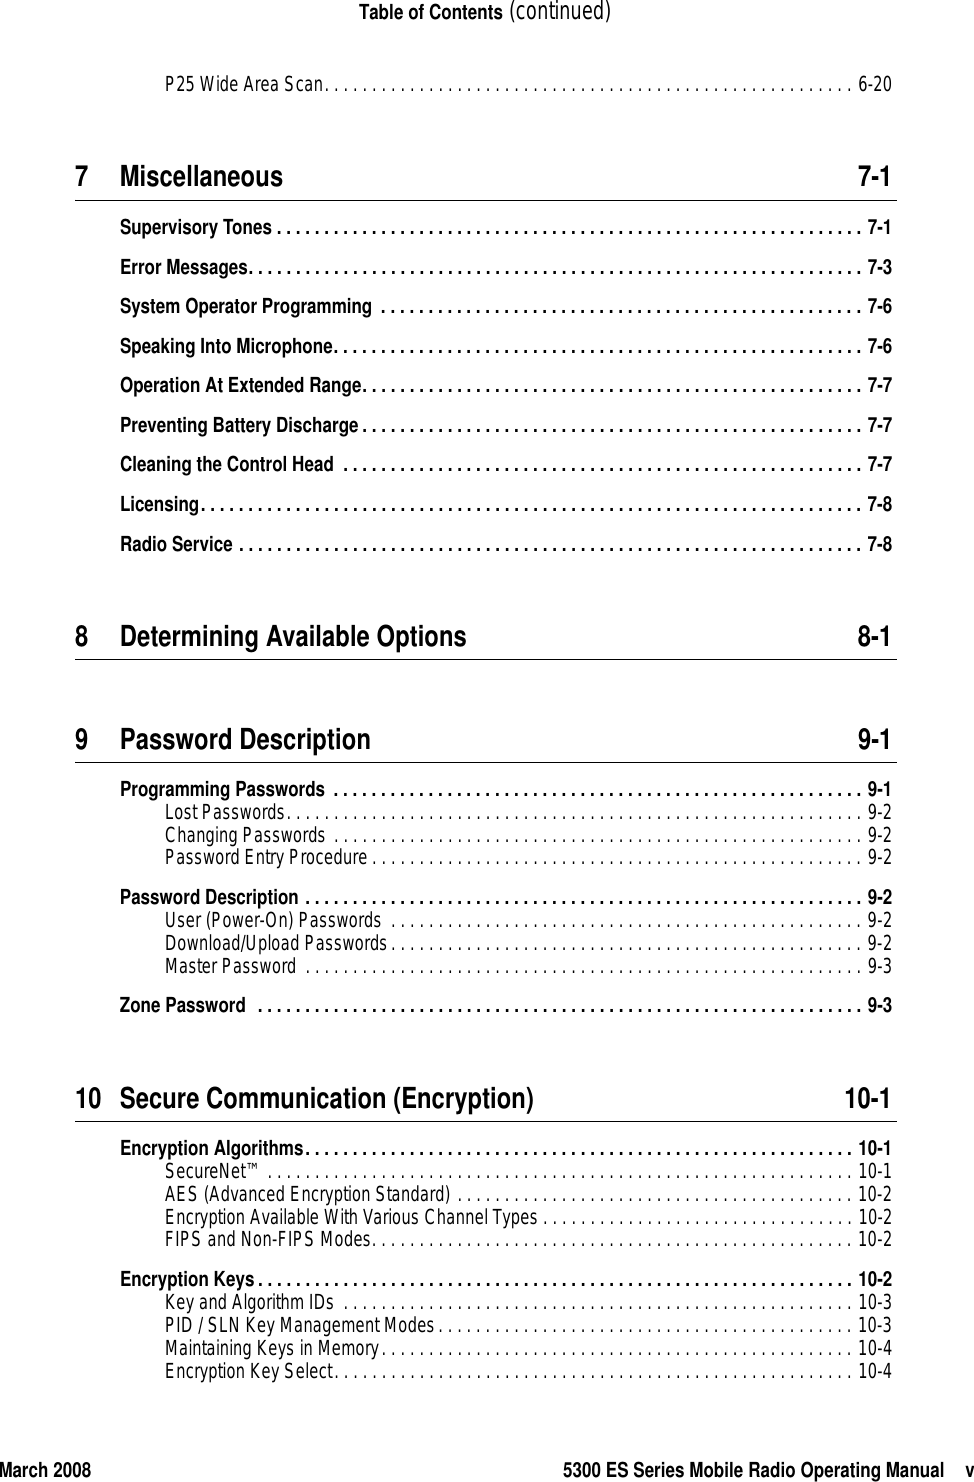 March 2008 5300 ES Series Mobile Radio Operating Manual vTable of Contents (continued)P25 Wide Area Scan. . . . . . . . . . . . . . . . . . . . . . . . . . . . . . . . . . . . . . . . . . . . . . . . . . . . . . . . 6-207 Miscellaneous 7-1Supervisory Tones . . . . . . . . . . . . . . . . . . . . . . . . . . . . . . . . . . . . . . . . . . . . . . . . . . . . . . . . . . . . . . 7-1Error Messages. . . . . . . . . . . . . . . . . . . . . . . . . . . . . . . . . . . . . . . . . . . . . . . . . . . . . . . . . . . . . . . . . 7-3System Operator Programming . . . . . . . . . . . . . . . . . . . . . . . . . . . . . . . . . . . . . . . . . . . . . . . . . . . 7-6Speaking Into Microphone. . . . . . . . . . . . . . . . . . . . . . . . . . . . . . . . . . . . . . . . . . . . . . . . . . . . . . . . 7-6Operation At Extended Range. . . . . . . . . . . . . . . . . . . . . . . . . . . . . . . . . . . . . . . . . . . . . . . . . . . . . 7-7Preventing Battery Discharge. . . . . . . . . . . . . . . . . . . . . . . . . . . . . . . . . . . . . . . . . . . . . . . . . . . . . 7-7Cleaning the Control Head  . . . . . . . . . . . . . . . . . . . . . . . . . . . . . . . . . . . . . . . . . . . . . . . . . . . . . . . 7-7Licensing. . . . . . . . . . . . . . . . . . . . . . . . . . . . . . . . . . . . . . . . . . . . . . . . . . . . . . . . . . . . . . . . . . . . . . 7-8Radio Service . . . . . . . . . . . . . . . . . . . . . . . . . . . . . . . . . . . . . . . . . . . . . . . . . . . . . . . . . . . . . . . . . . 7-88 Determining Available Options 8-19 Password Description 9-1Programming Passwords . . . . . . . . . . . . . . . . . . . . . . . . . . . . . . . . . . . . . . . . . . . . . . . . . . . . . . . . 9-1Lost Passwords. . . . . . . . . . . . . . . . . . . . . . . . . . . . . . . . . . . . . . . . . . . . . . . . . . . . . . . . . . . . . 9-2Changing Passwords . . . . . . . . . . . . . . . . . . . . . . . . . . . . . . . . . . . . . . . . . . . . . . . . . . . . . . . . 9-2Password Entry Procedure. . . . . . . . . . . . . . . . . . . . . . . . . . . . . . . . . . . . . . . . . . . . . . . . . . . . 9-2Password Description . . . . . . . . . . . . . . . . . . . . . . . . . . . . . . . . . . . . . . . . . . . . . . . . . . . . . . . . . . . 9-2User (Power-On) Passwords . . . . . . . . . . . . . . . . . . . . . . . . . . . . . . . . . . . . . . . . . . . . . . . . . . 9-2Download/Upload Passwords. . . . . . . . . . . . . . . . . . . . . . . . . . . . . . . . . . . . . . . . . . . . . . . . . . 9-2Master Password . . . . . . . . . . . . . . . . . . . . . . . . . . . . . . . . . . . . . . . . . . . . . . . . . . . . . . . . . . . 9-3Zone Password  . . . . . . . . . . . . . . . . . . . . . . . . . . . . . . . . . . . . . . . . . . . . . . . . . . . . . . . . . . . . . . . . 9-310 Secure Communication (Encryption) 10-1Encryption Algorithms. . . . . . . . . . . . . . . . . . . . . . . . . . . . . . . . . . . . . . . . . . . . . . . . . . . . . . . . . . 10-1SecureNet™ . . . . . . . . . . . . . . . . . . . . . . . . . . . . . . . . . . . . . . . . . . . . . . . . . . . . . . . . . . . . . . 10-1AES (Advanced Encryption Standard) . . . . . . . . . . . . . . . . . . . . . . . . . . . . . . . . . . . . . . . . . . 10-2Encryption Available With Various Channel Types . . . . . . . . . . . . . . . . . . . . . . . . . . . . . . . . . 10-2FIPS and Non-FIPS Modes. . . . . . . . . . . . . . . . . . . . . . . . . . . . . . . . . . . . . . . . . . . . . . . . . . . 10-2Encryption Keys. . . . . . . . . . . . . . . . . . . . . . . . . . . . . . . . . . . . . . . . . . . . . . . . . . . . . . . . . . . . . . . 10-2Key and Algorithm IDs . . . . . . . . . . . . . . . . . . . . . . . . . . . . . . . . . . . . . . . . . . . . . . . . . . . . . . 10-3PID / SLN Key Management Modes. . . . . . . . . . . . . . . . . . . . . . . . . . . . . . . . . . . . . . . . . . . . 10-3Maintaining Keys in Memory. . . . . . . . . . . . . . . . . . . . . . . . . . . . . . . . . . . . . . . . . . . . . . . . . . 10-4Encryption Key Select. . . . . . . . . . . . . . . . . . . . . . . . . . . . . . . . . . . . . . . . . . . . . . . . . . . . . . . 10-4